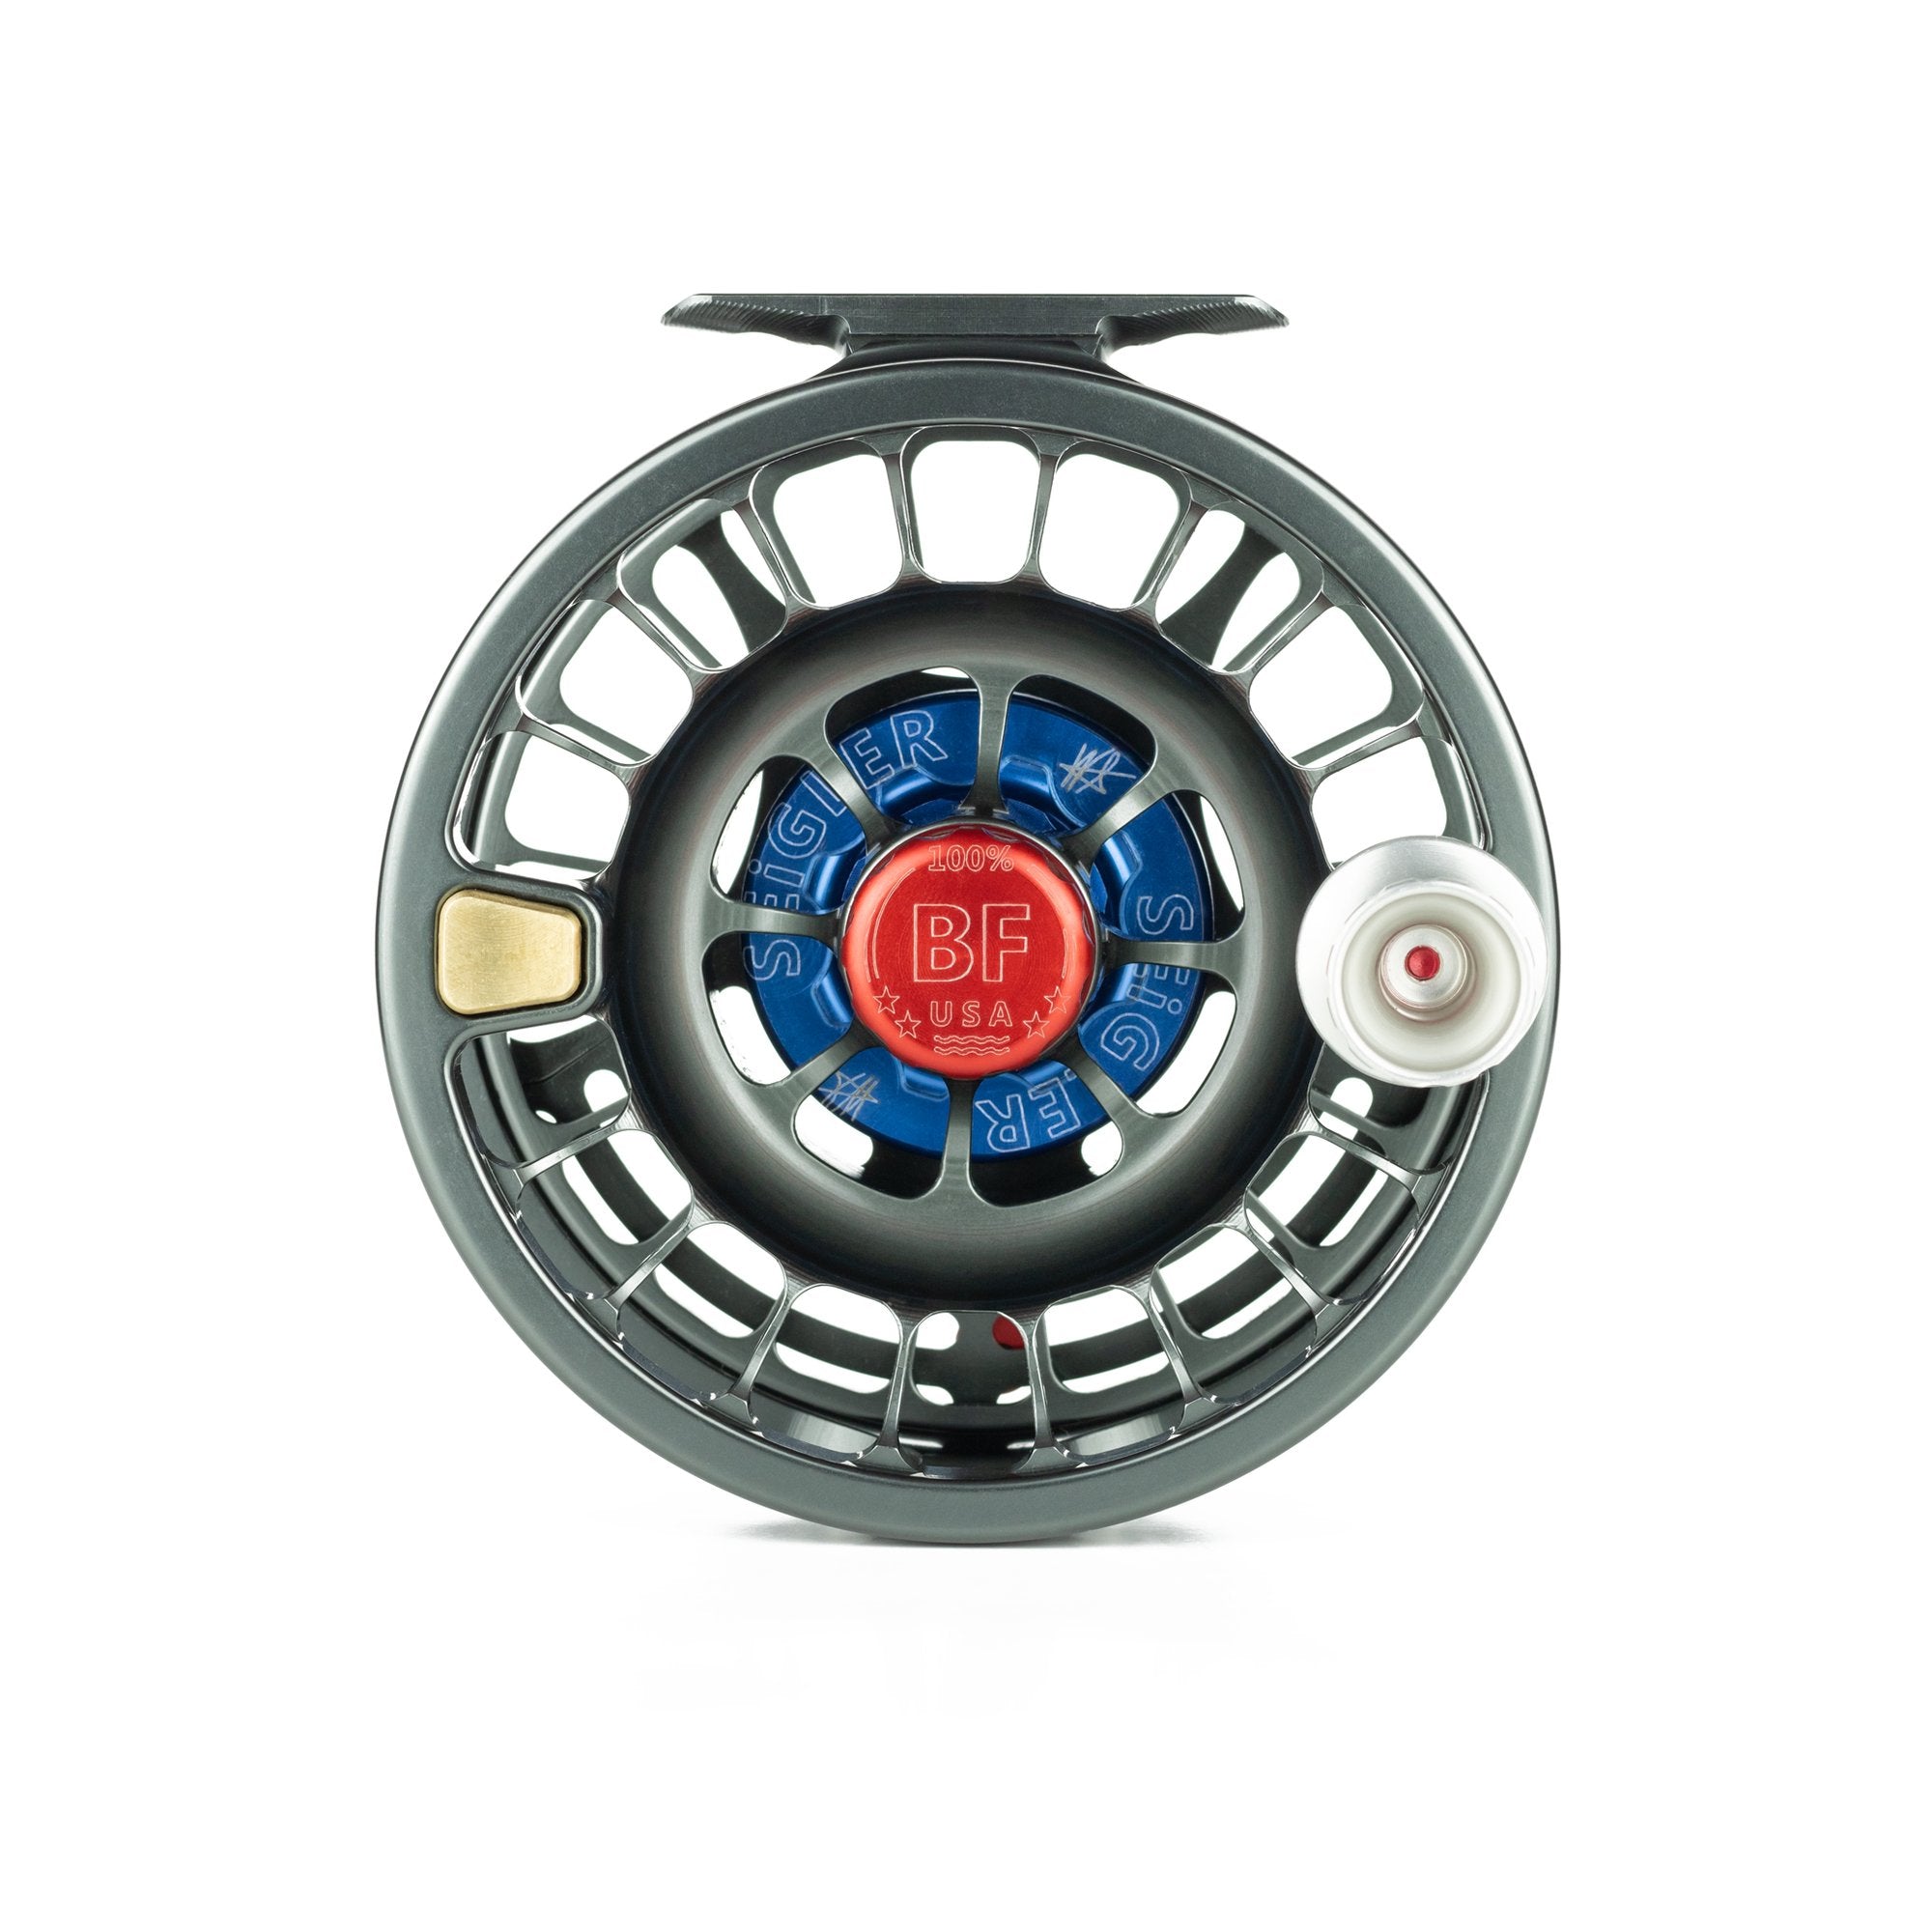 Seigler BF (Big Fly) Lever Drag Fly Reel - Tailwater Outfitters